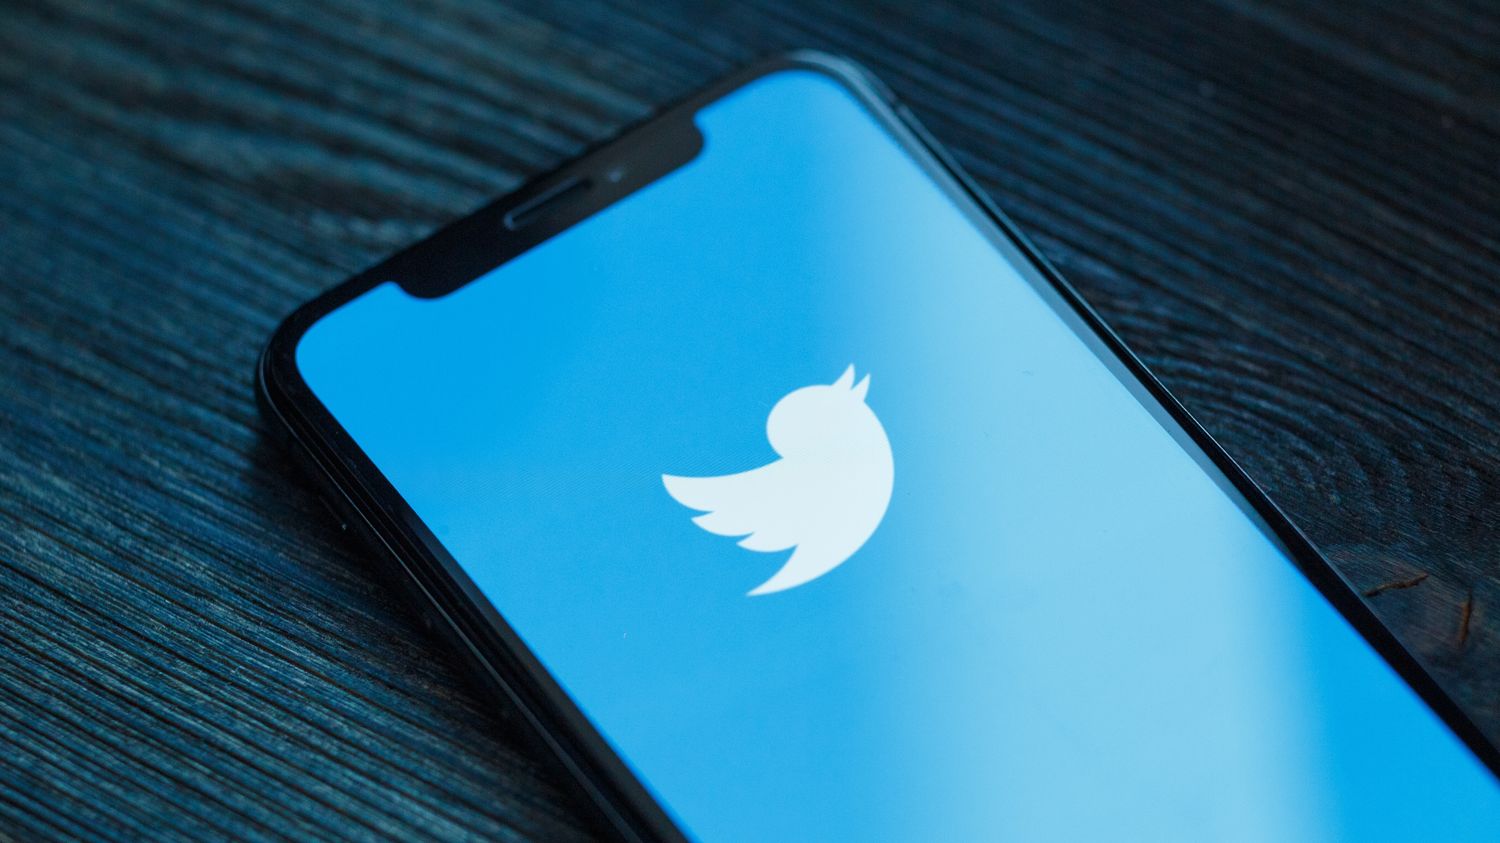 twitter-testing-buy-button-as-it-looks-at-ways-to-boost-revenue